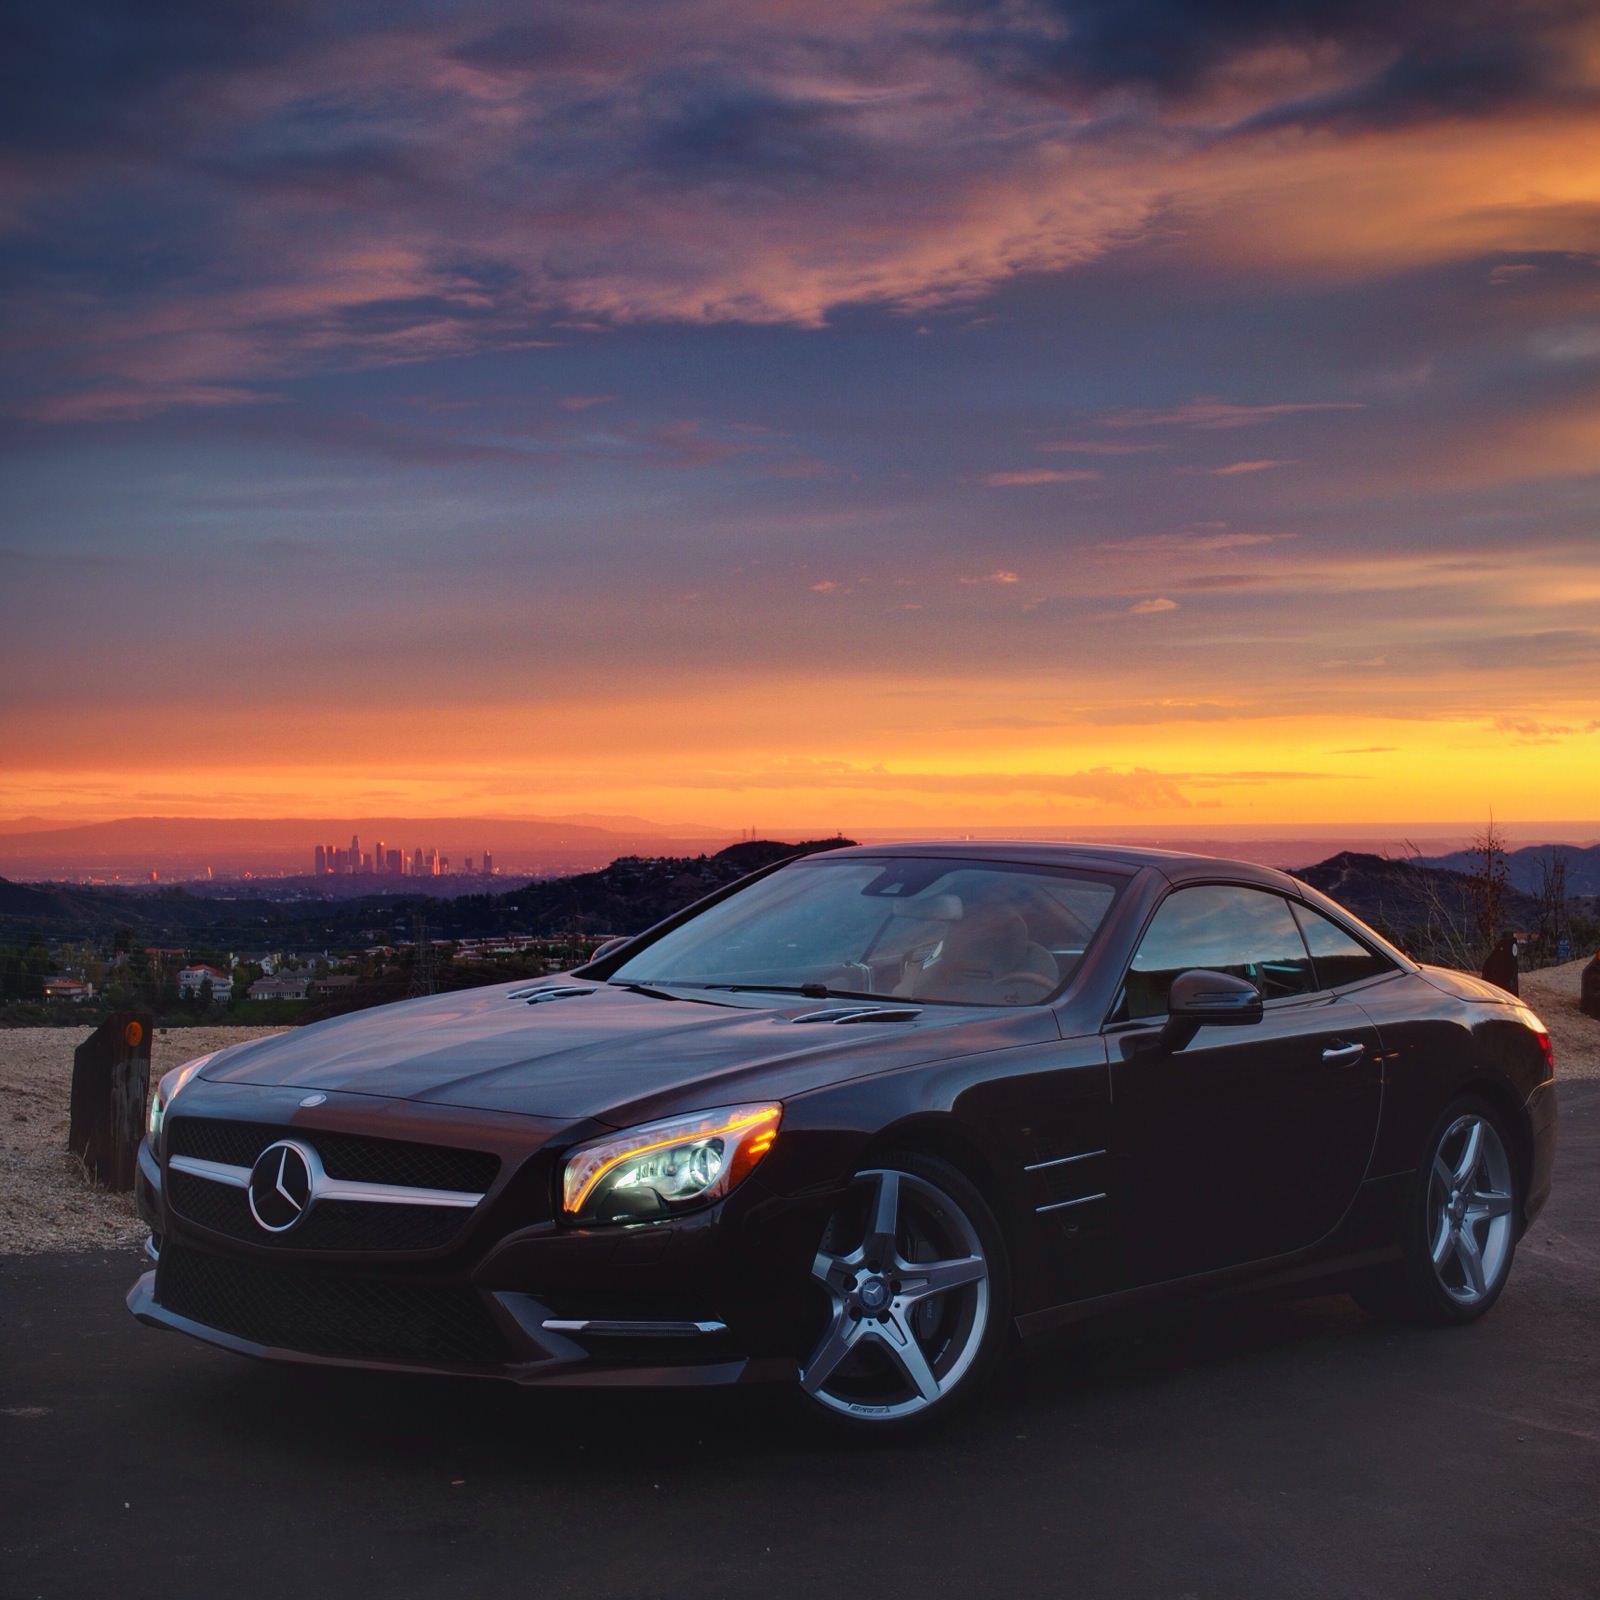 Mercedes-Benz photo with the Los Angeles skyline, shot on a Micro four thirds camera